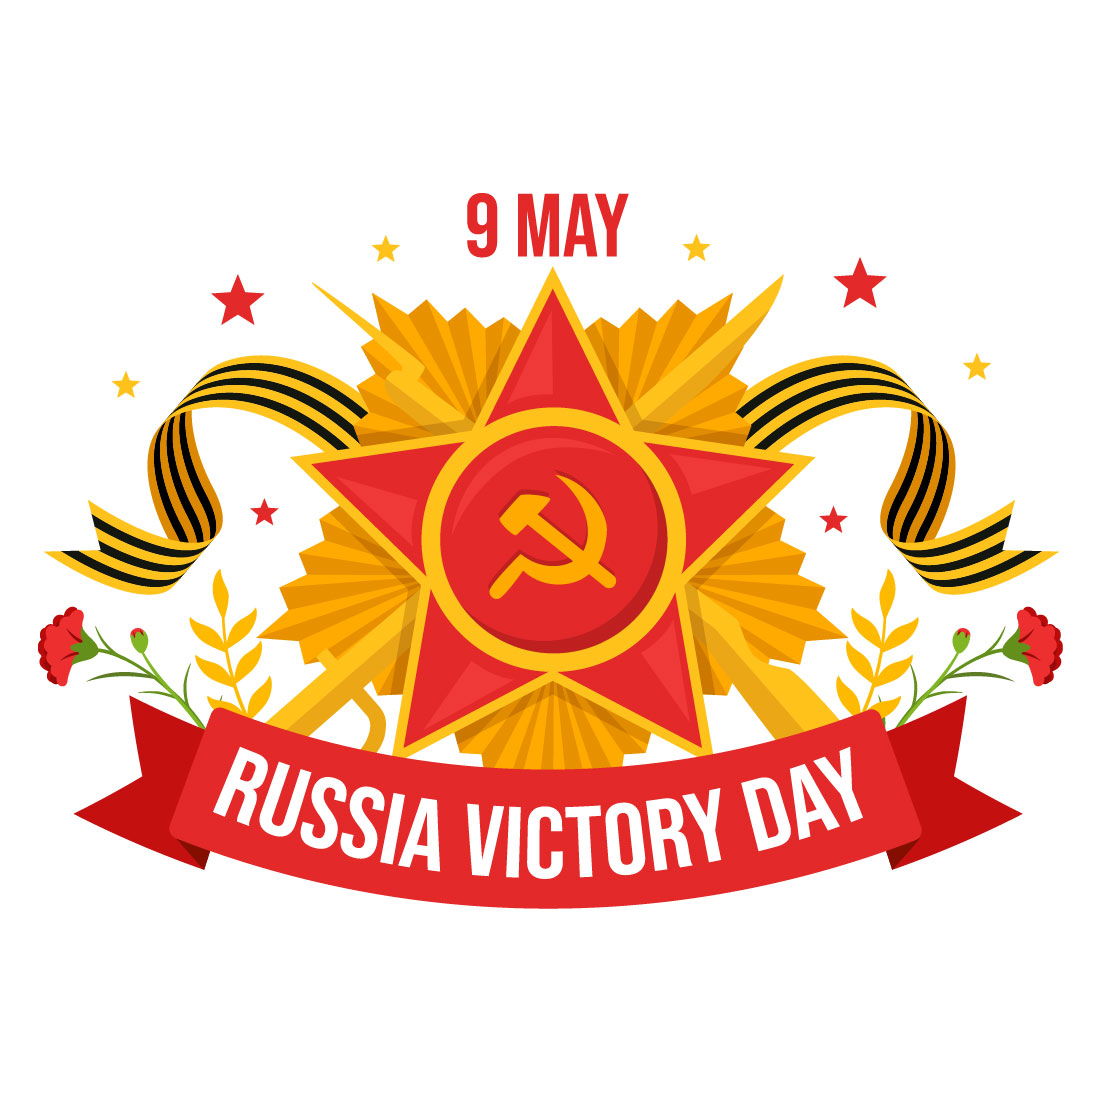 12 Russia Victory Day Illustration cover image.